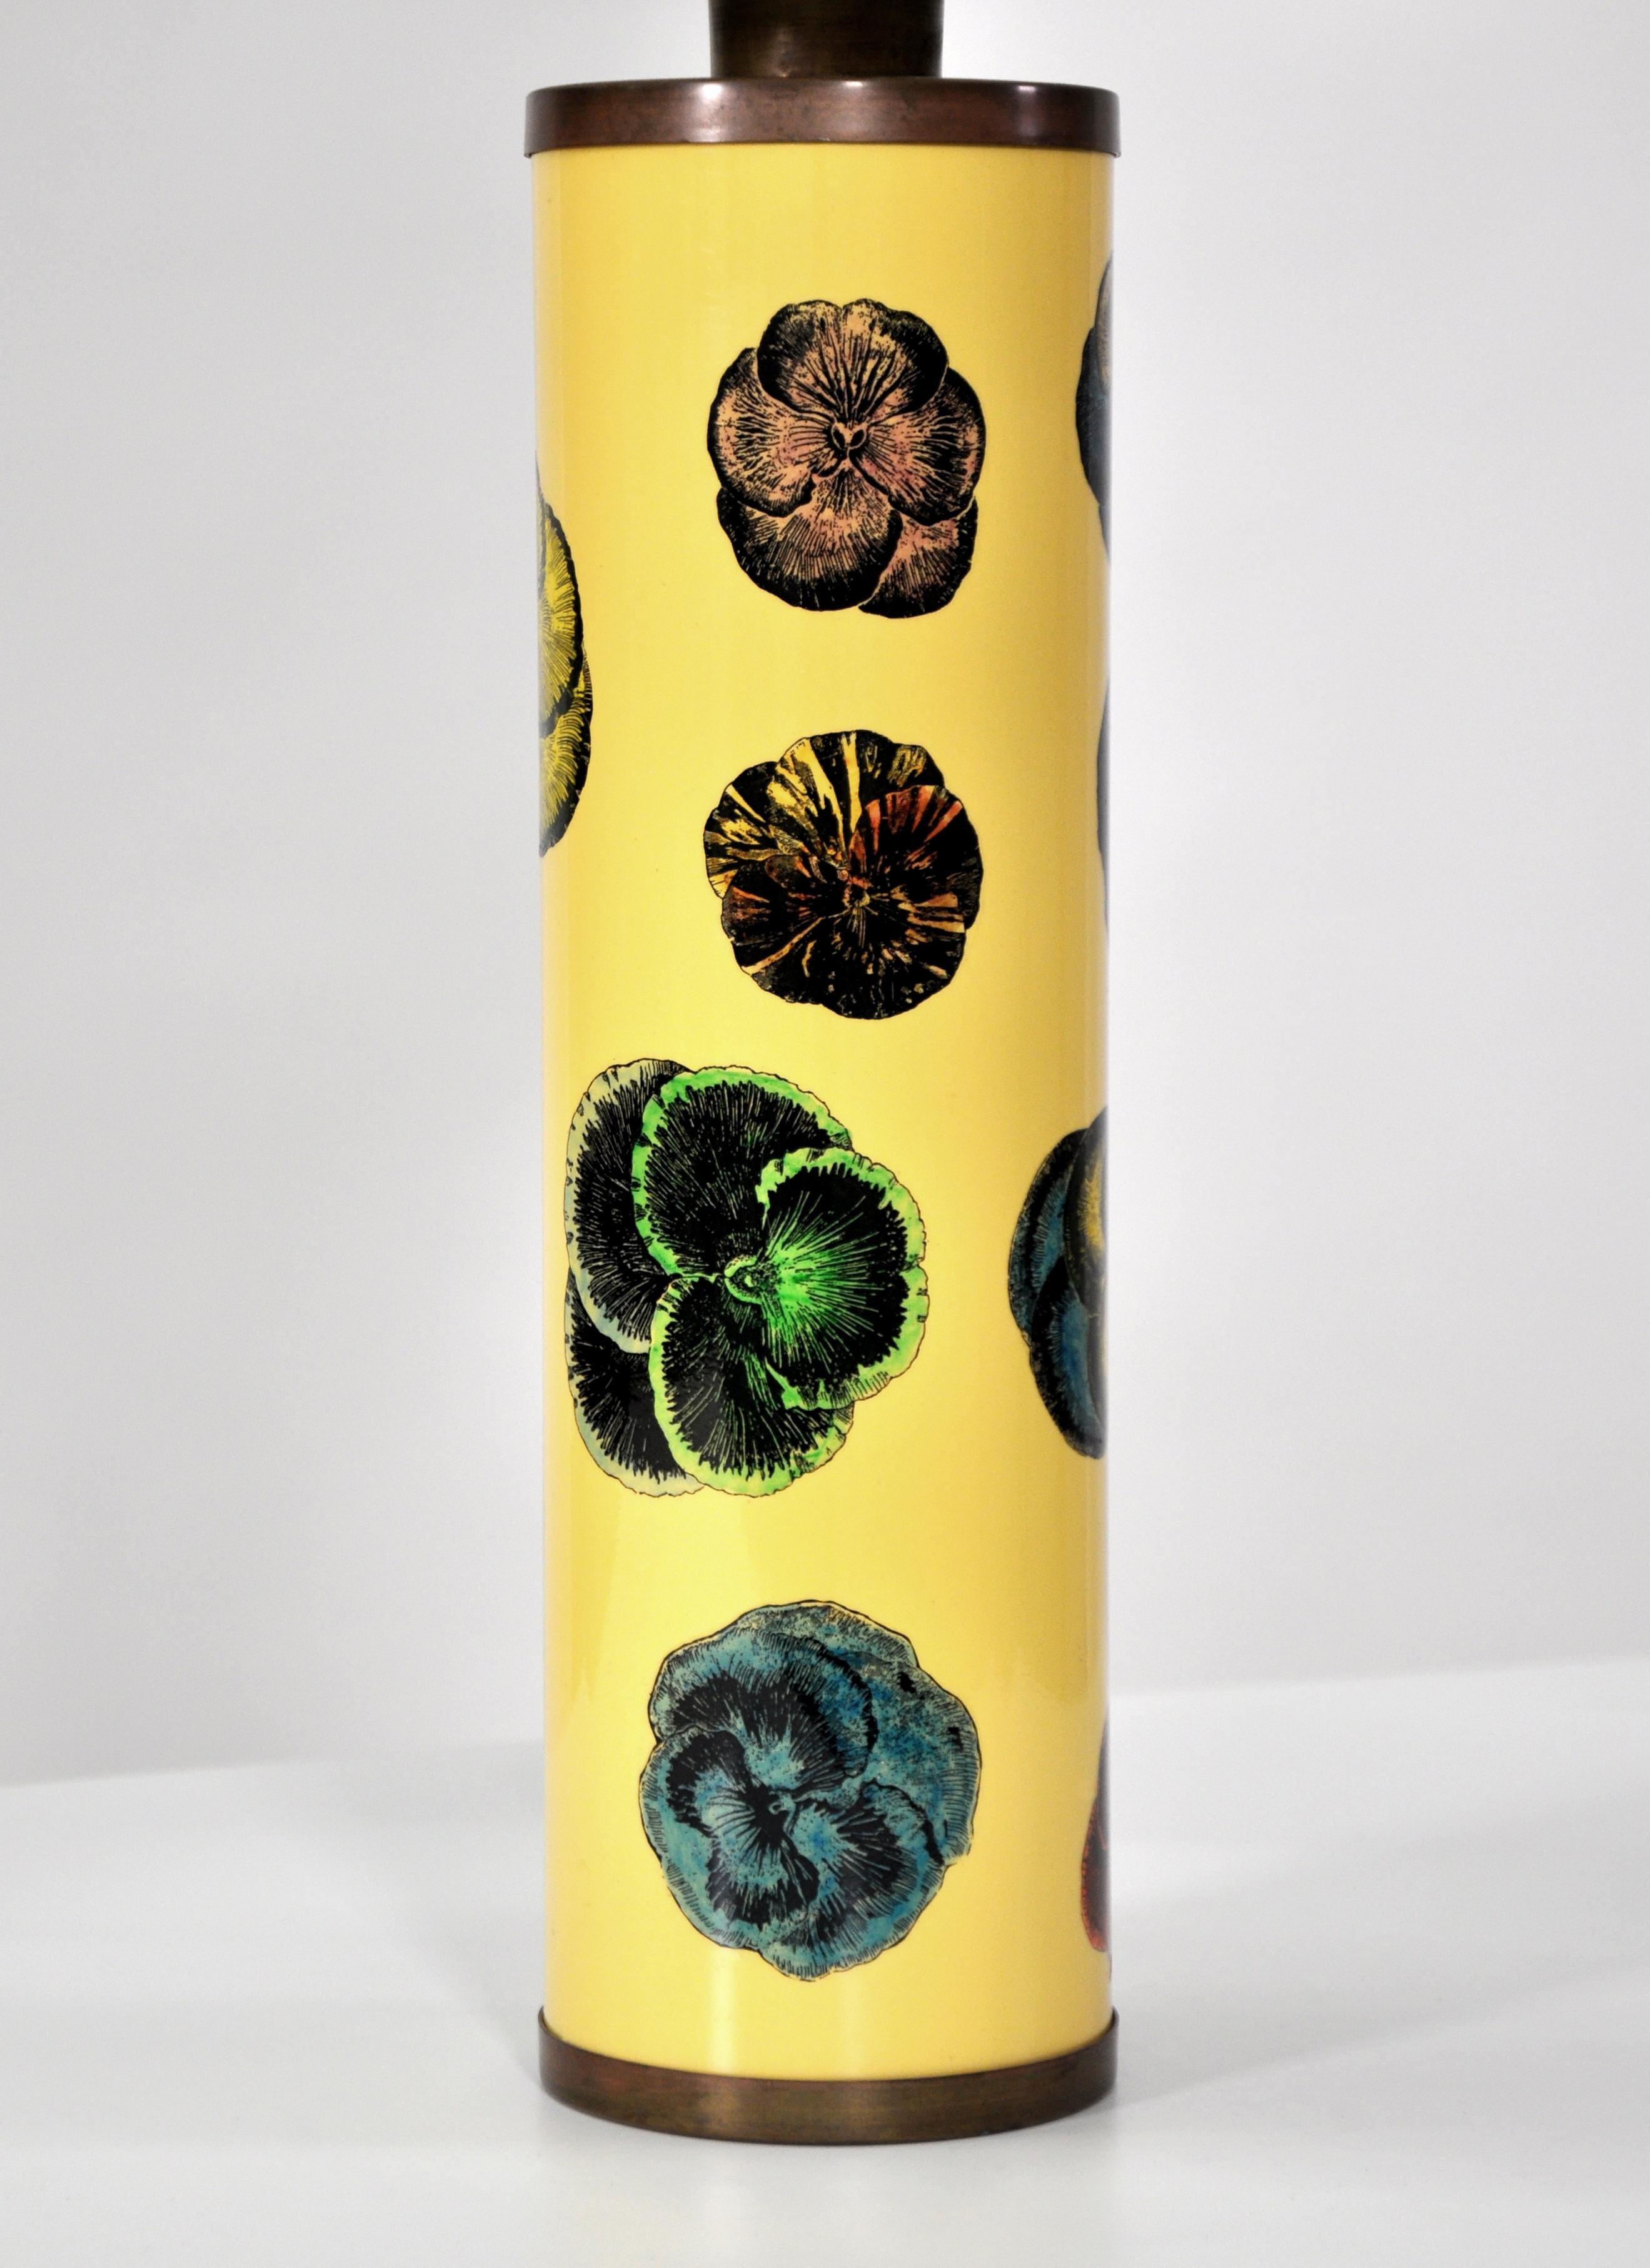 This vintage Mid-Century Modern lamp was designed in the late 1950s by the Italian master of playful and surreal self-expression, Piero Fornasetti. The brass lamp features lithographically printed green, blue, pink and purple violet flowers on a